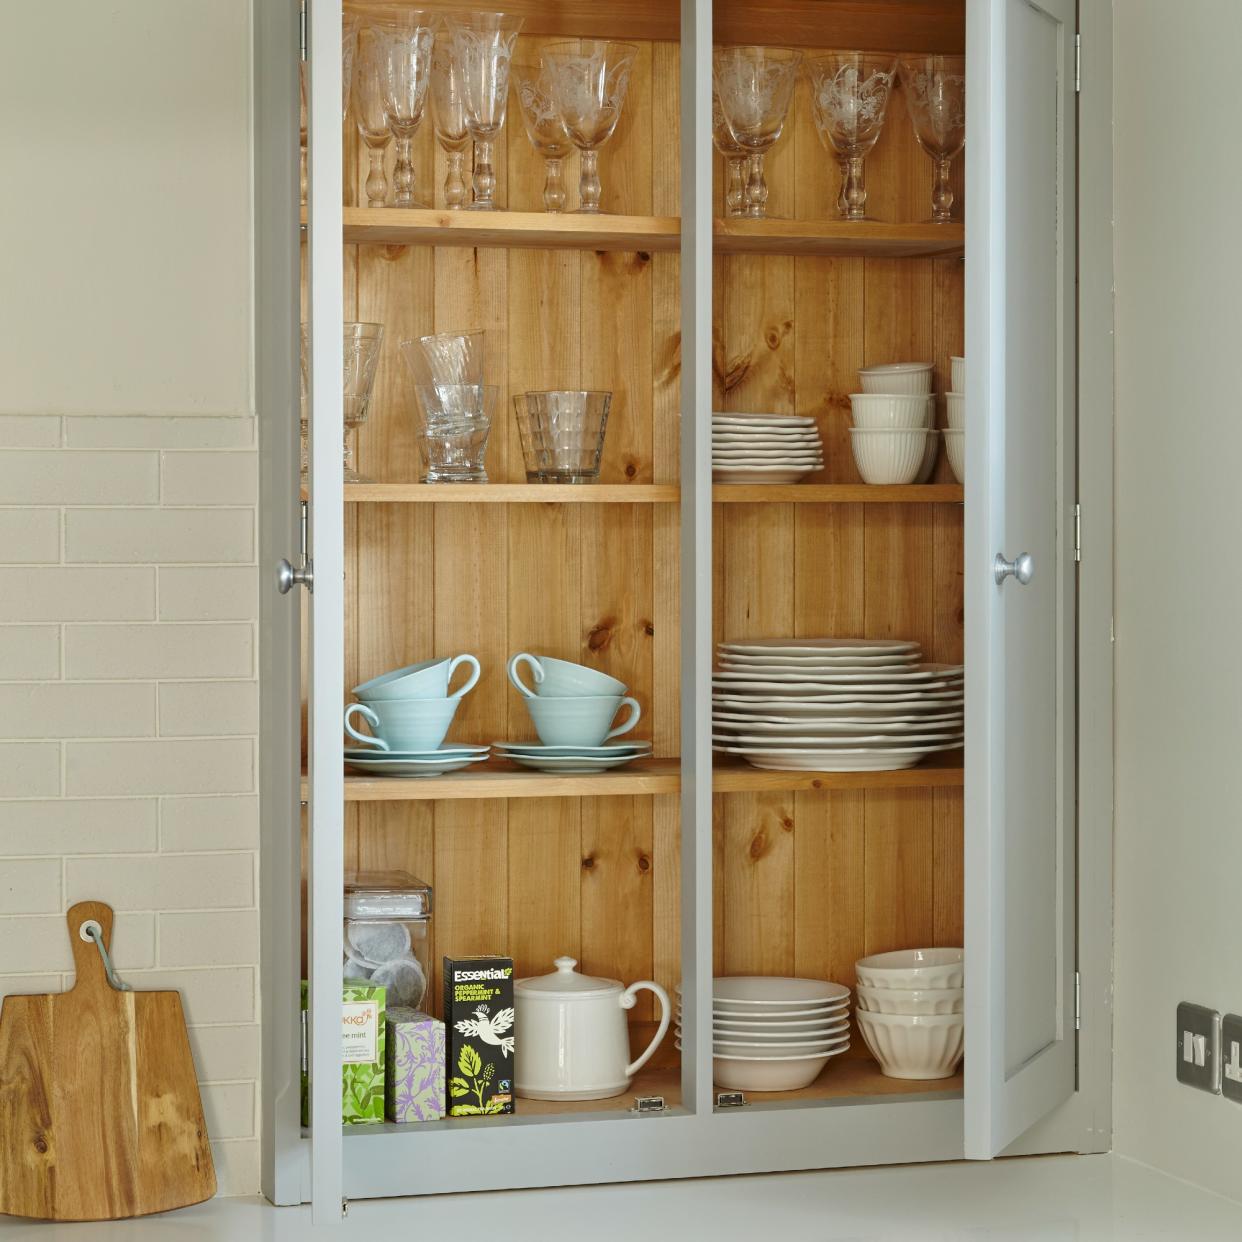  A kitchen cupboard filled with tableware and glassware. 